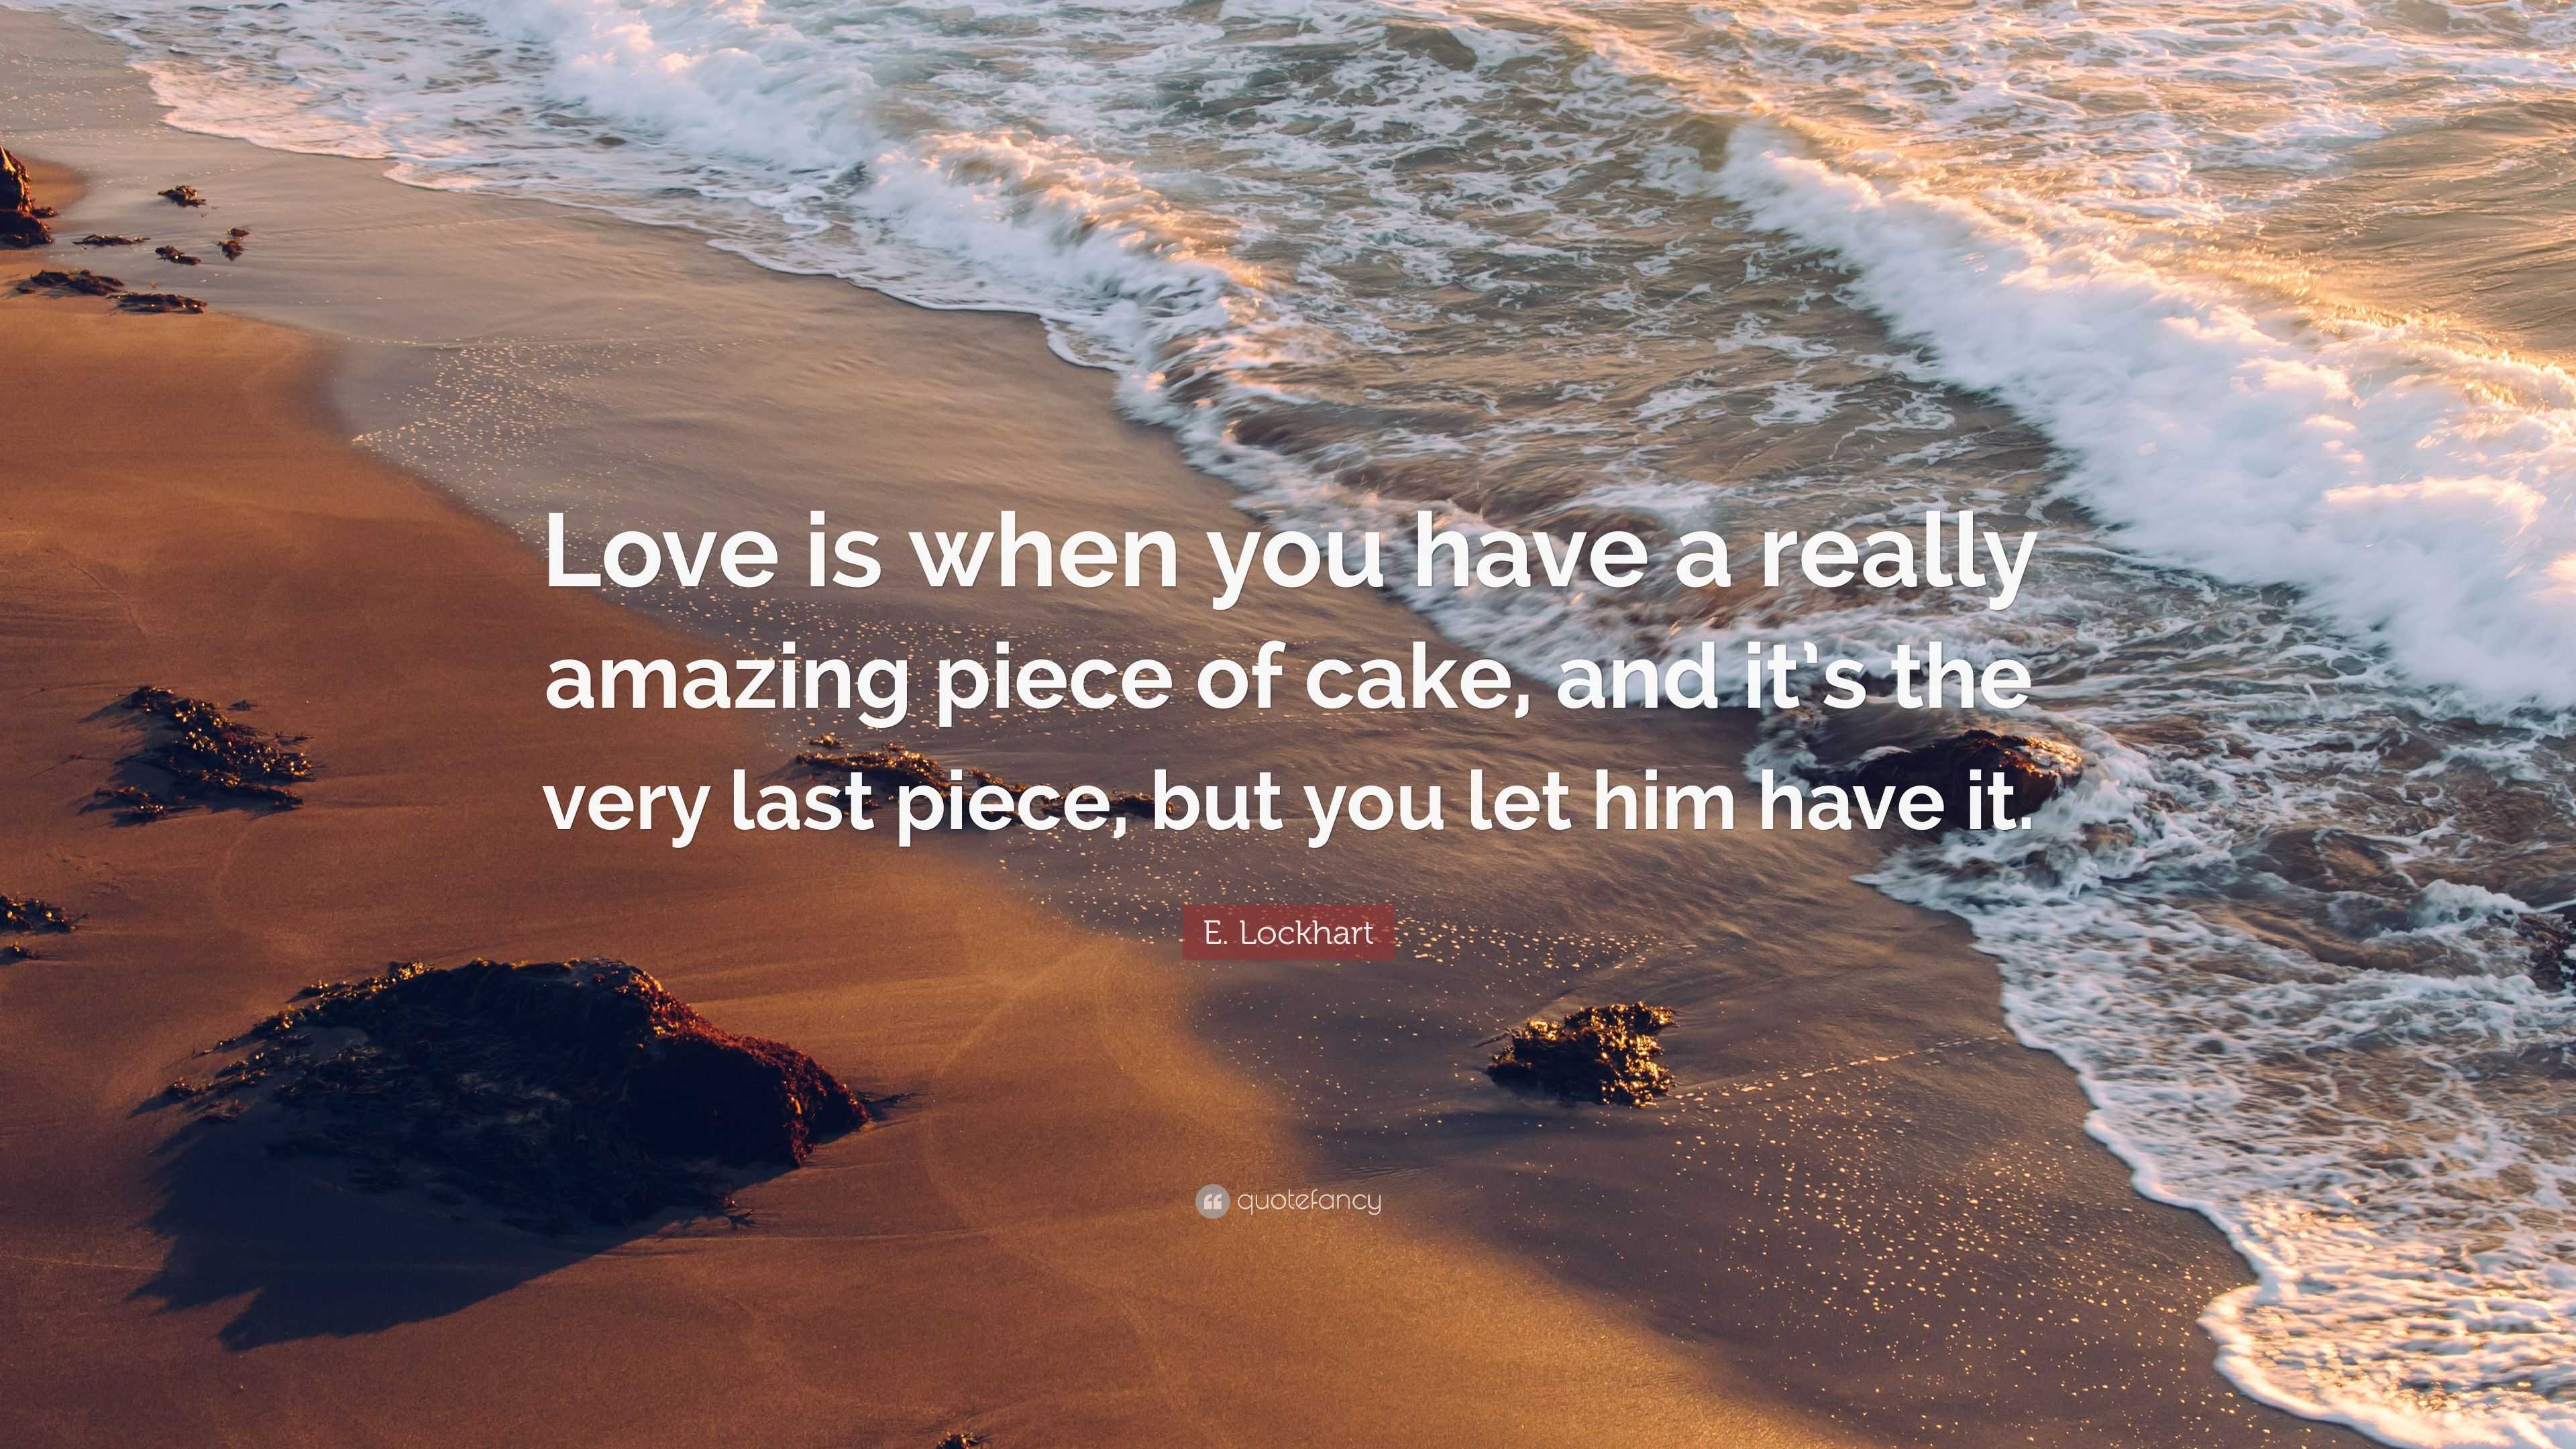 E. Lockhart Quote: “Love is when you have a really amazing piece of ...